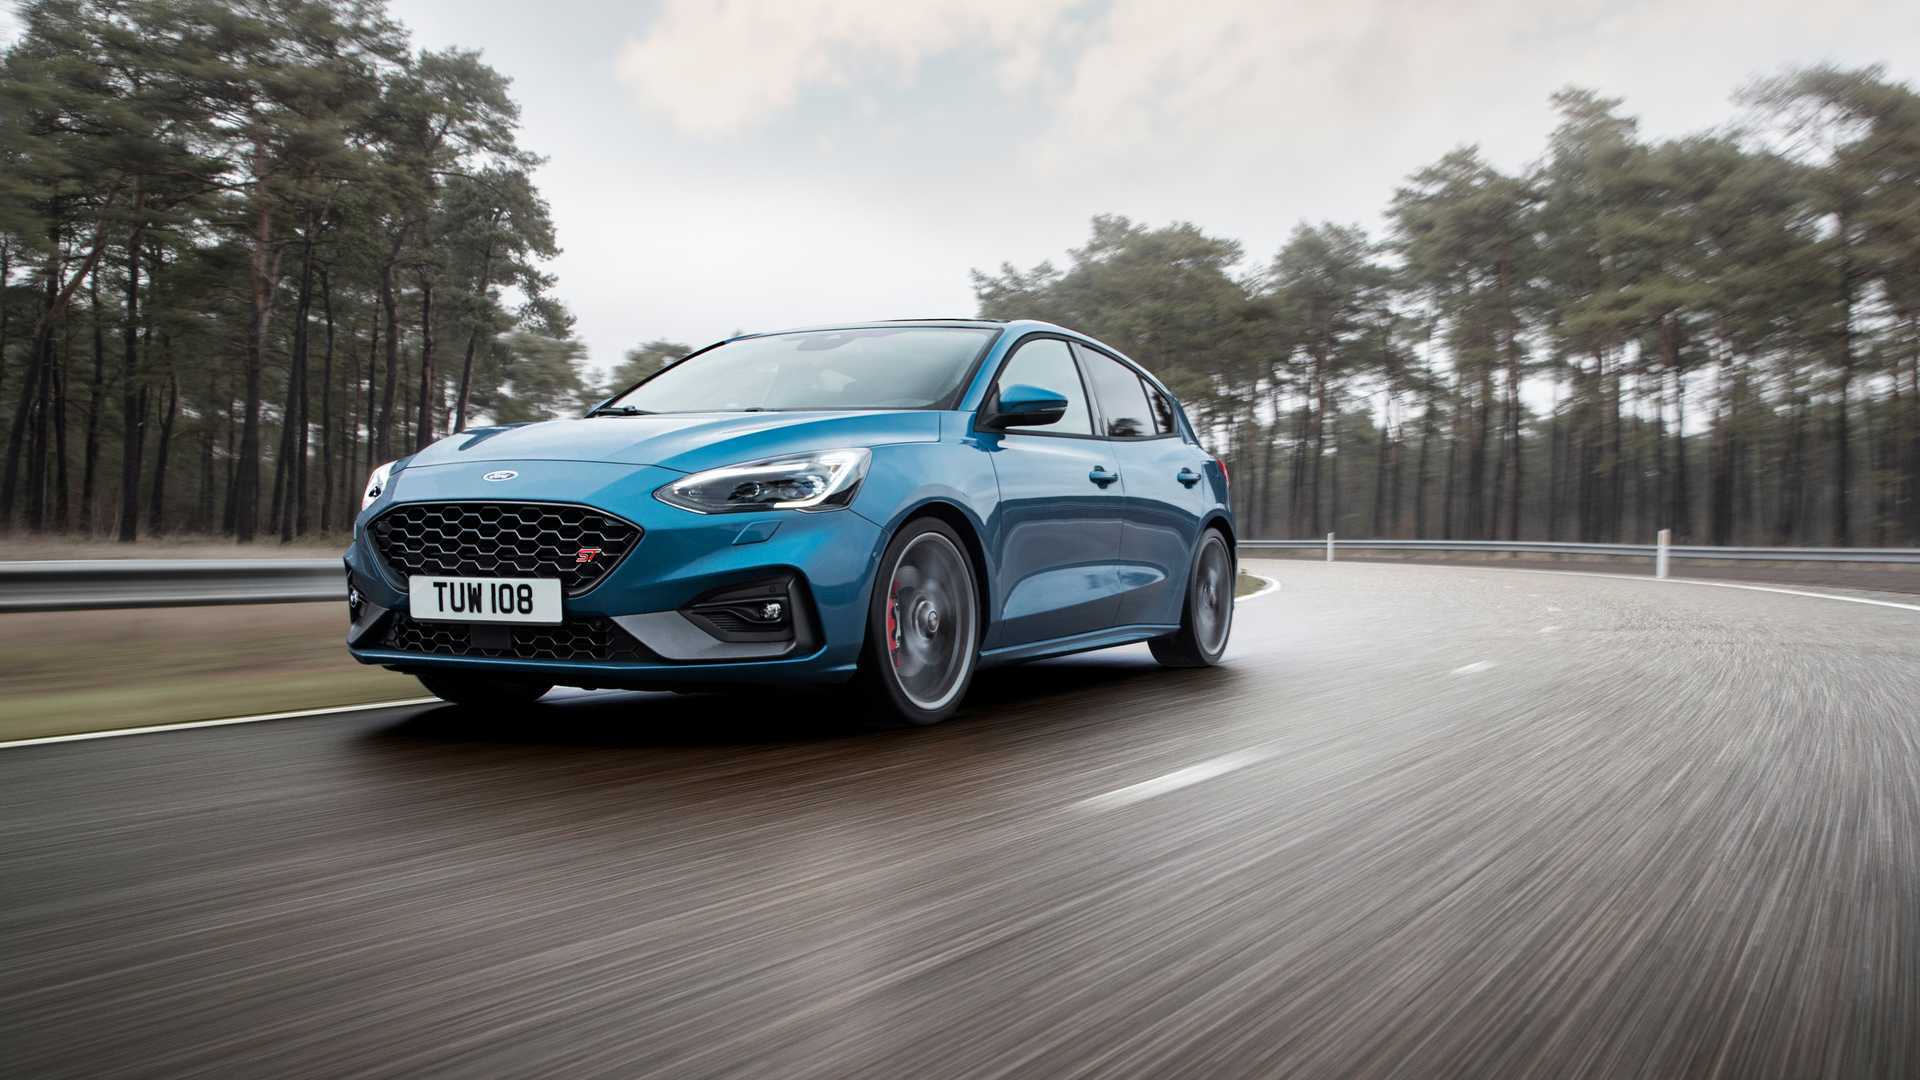 New Ford Focus ST Picture and Wallpaper Gallery